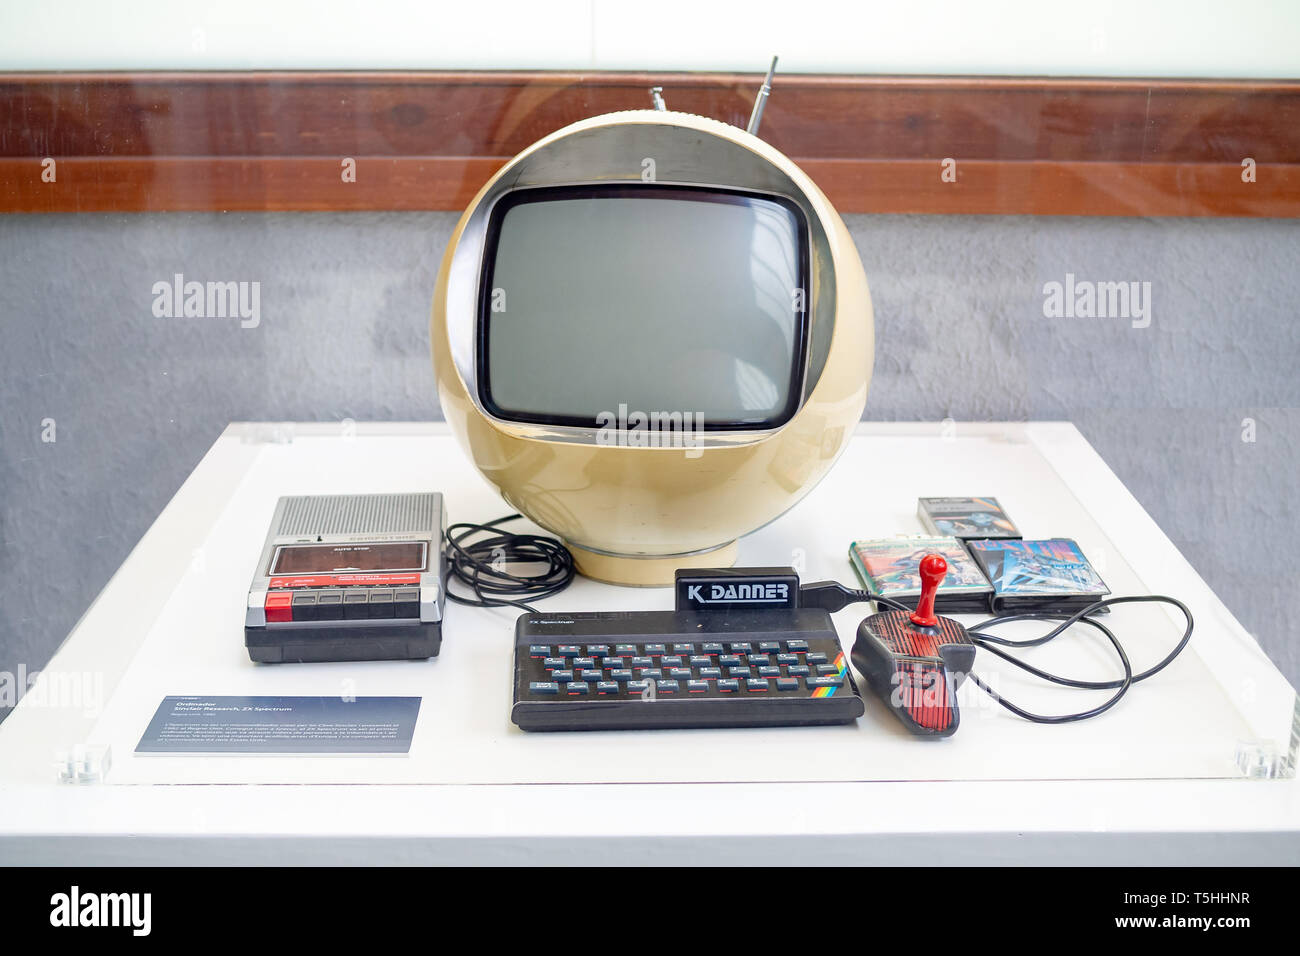 TERRASSA, SPAIN-MARCH 19, 2019: 1982 ZX Spectrum 8-bit personal home computer by Sinclair Research in the National Museum of Science and Technology of Stock Photo